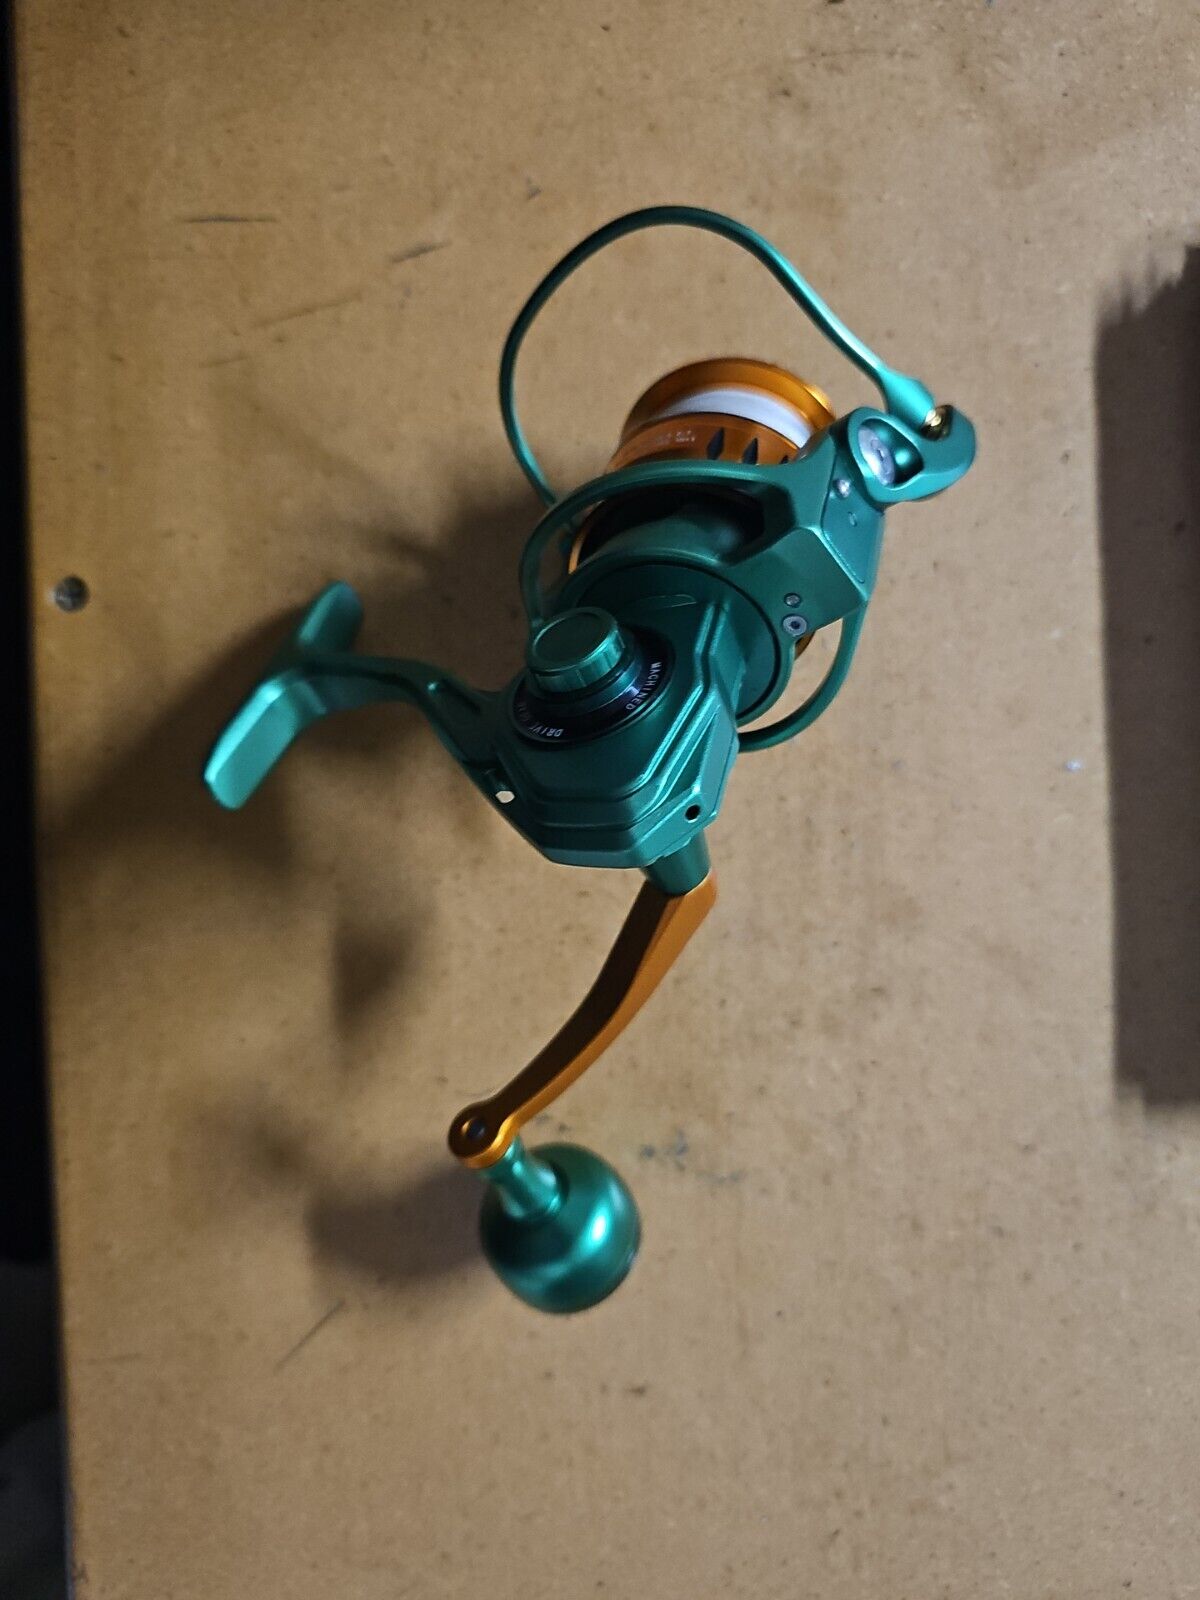 CAMEKOON Saltwater Spinning Used Once Fishing Reel Aluminum Body